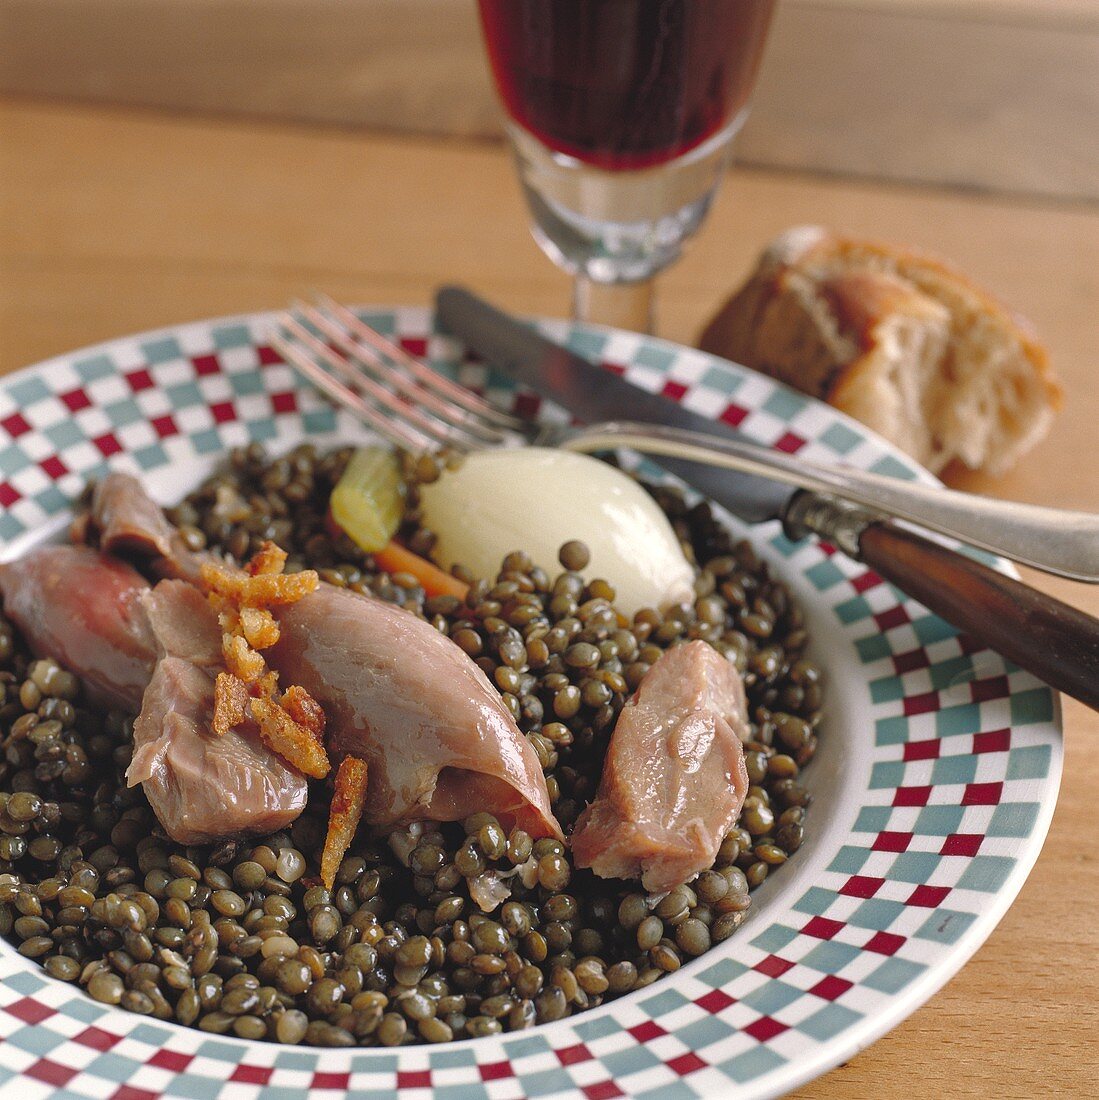 Duck and lentil stew with onion on plate